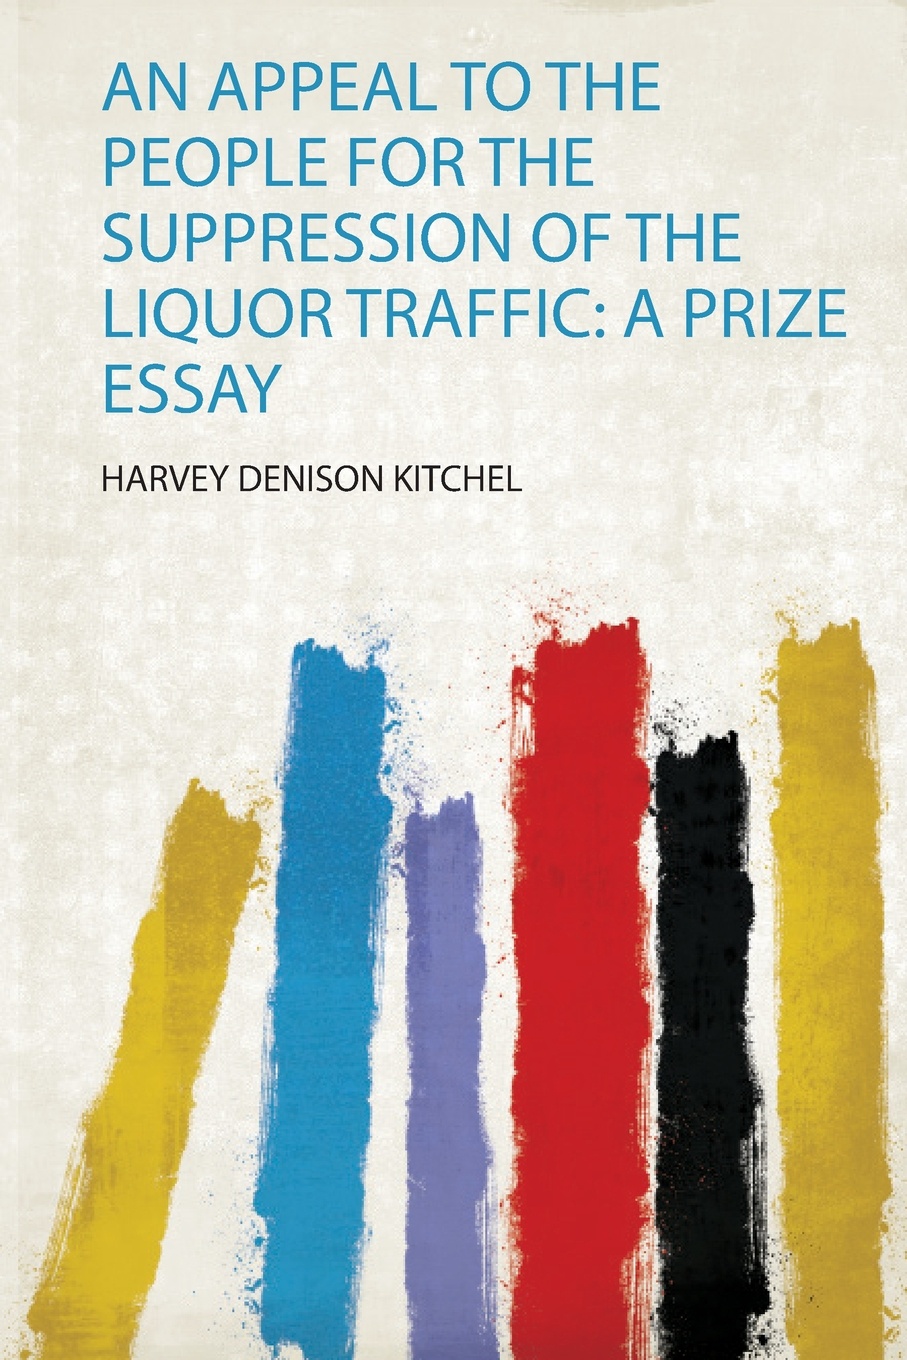 An Appeal to the People for the Suppression of the Liquor Traffic. a Prize Essay